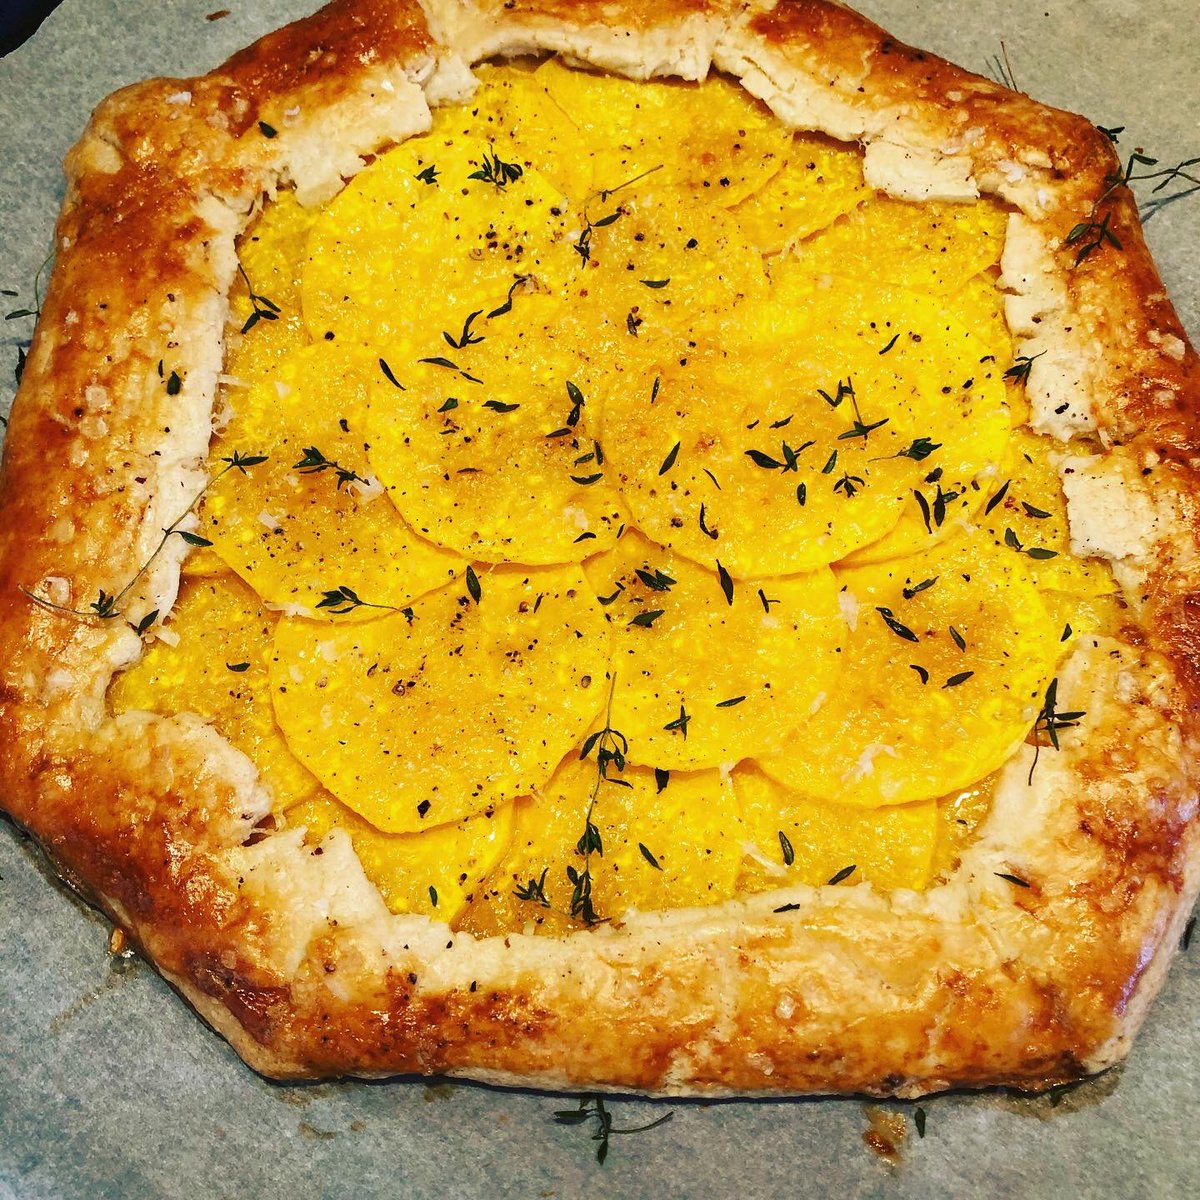 Butternut squash galette for tonight’s family meal. Turned out pretty good. #homecooking #familymeals #toddlerfriendly #babyledfeeding Recipe: Baby led feeding